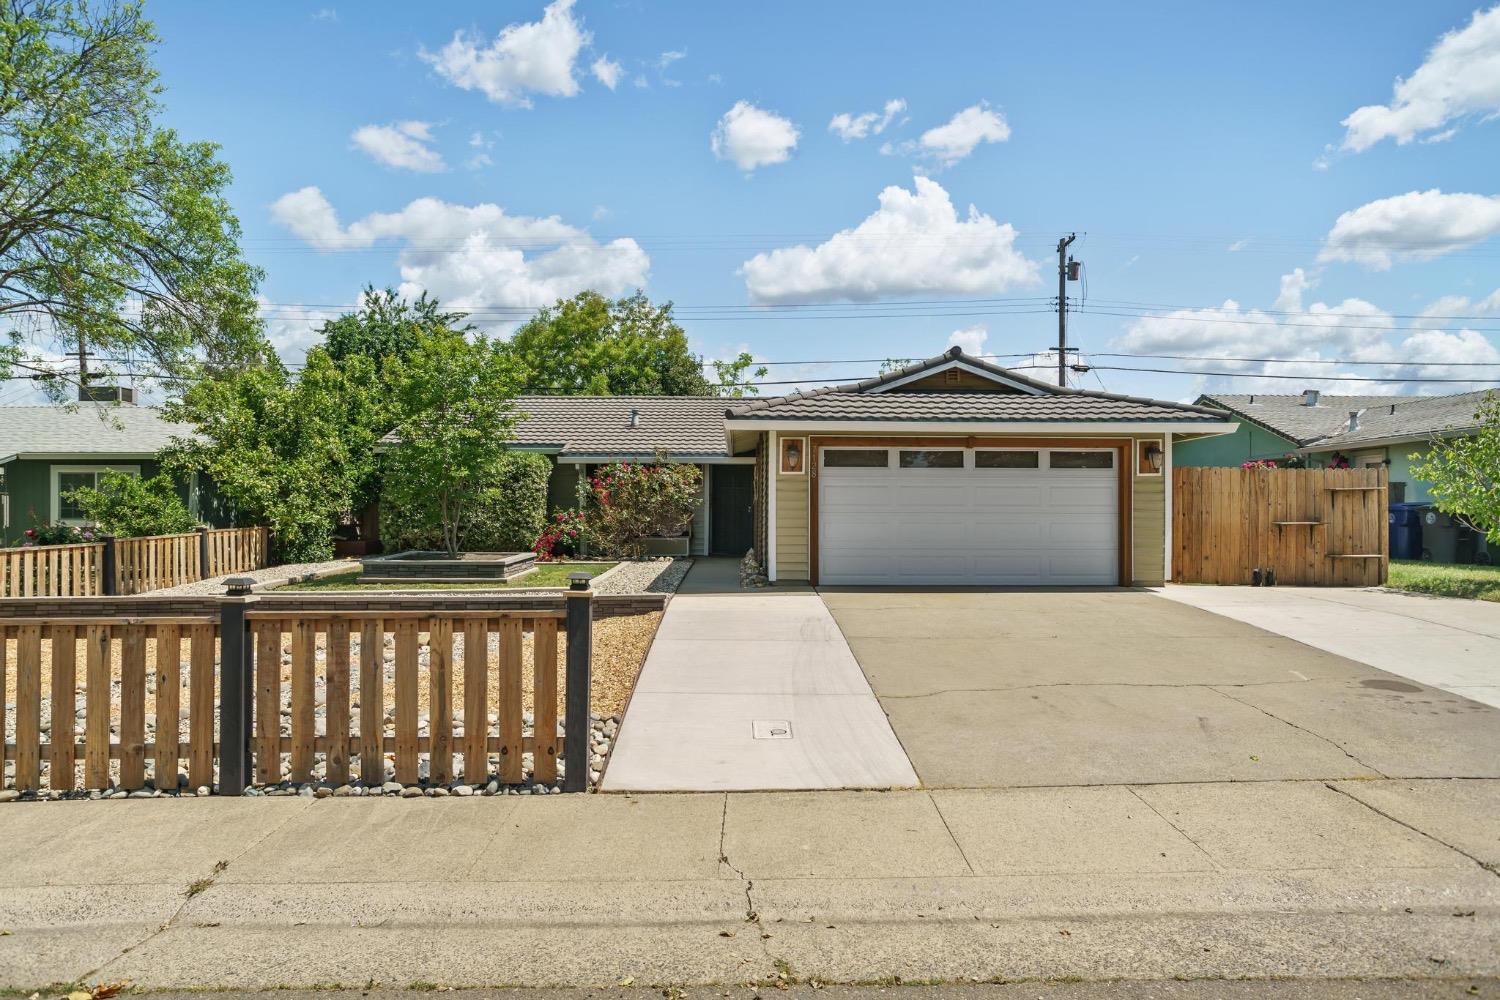 Photo of 7128 Grenola Wy in Citrus Heights, CA